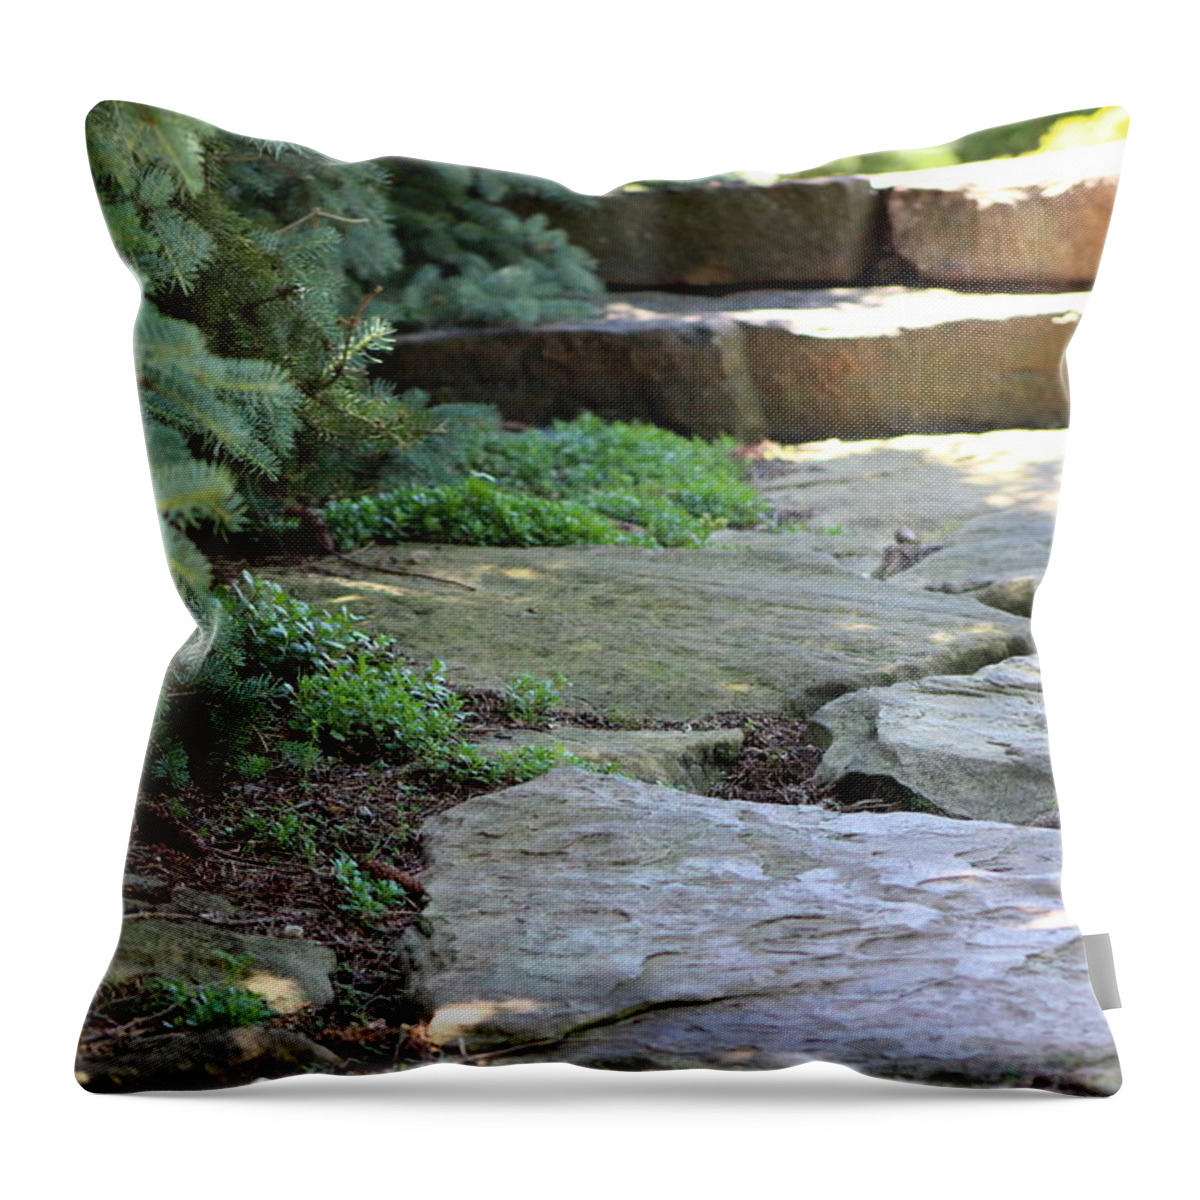 Garden Stairs Throw Pillow featuring the photograph Garden Landscape - Stone Stairs by Colleen Cornelius